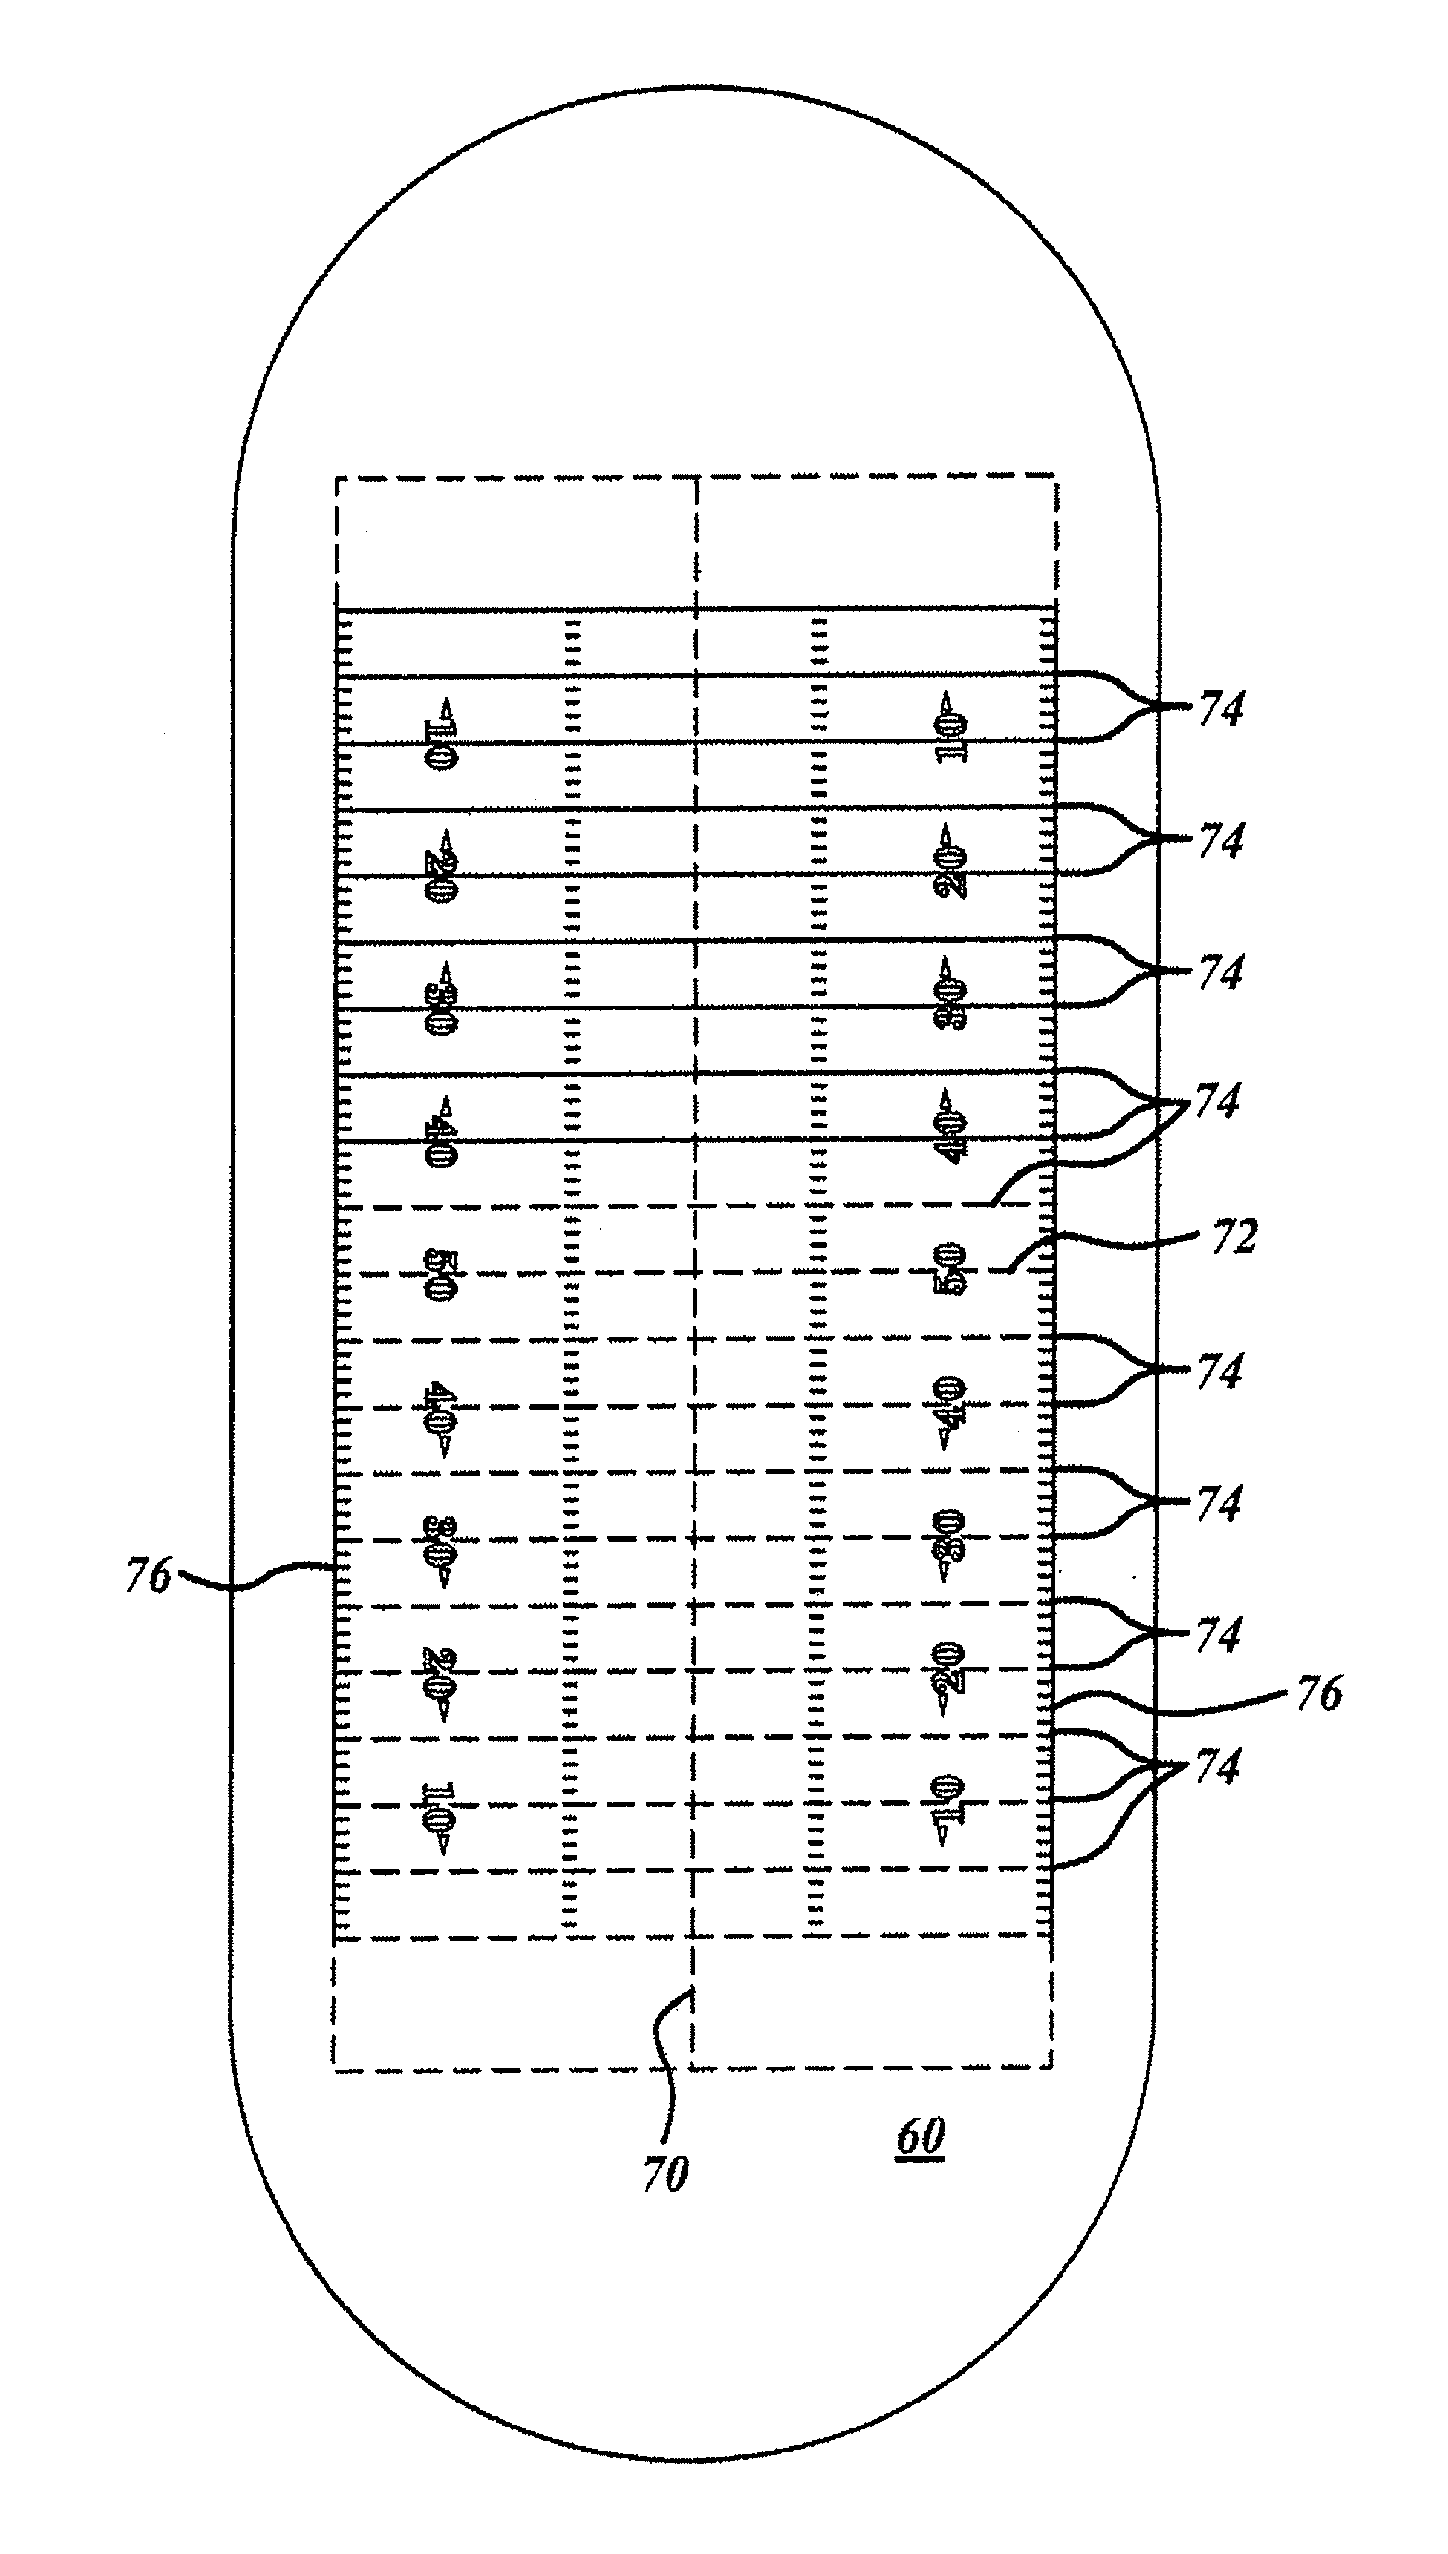 Method and apparatus for pre-fabricating a synthetic sports field